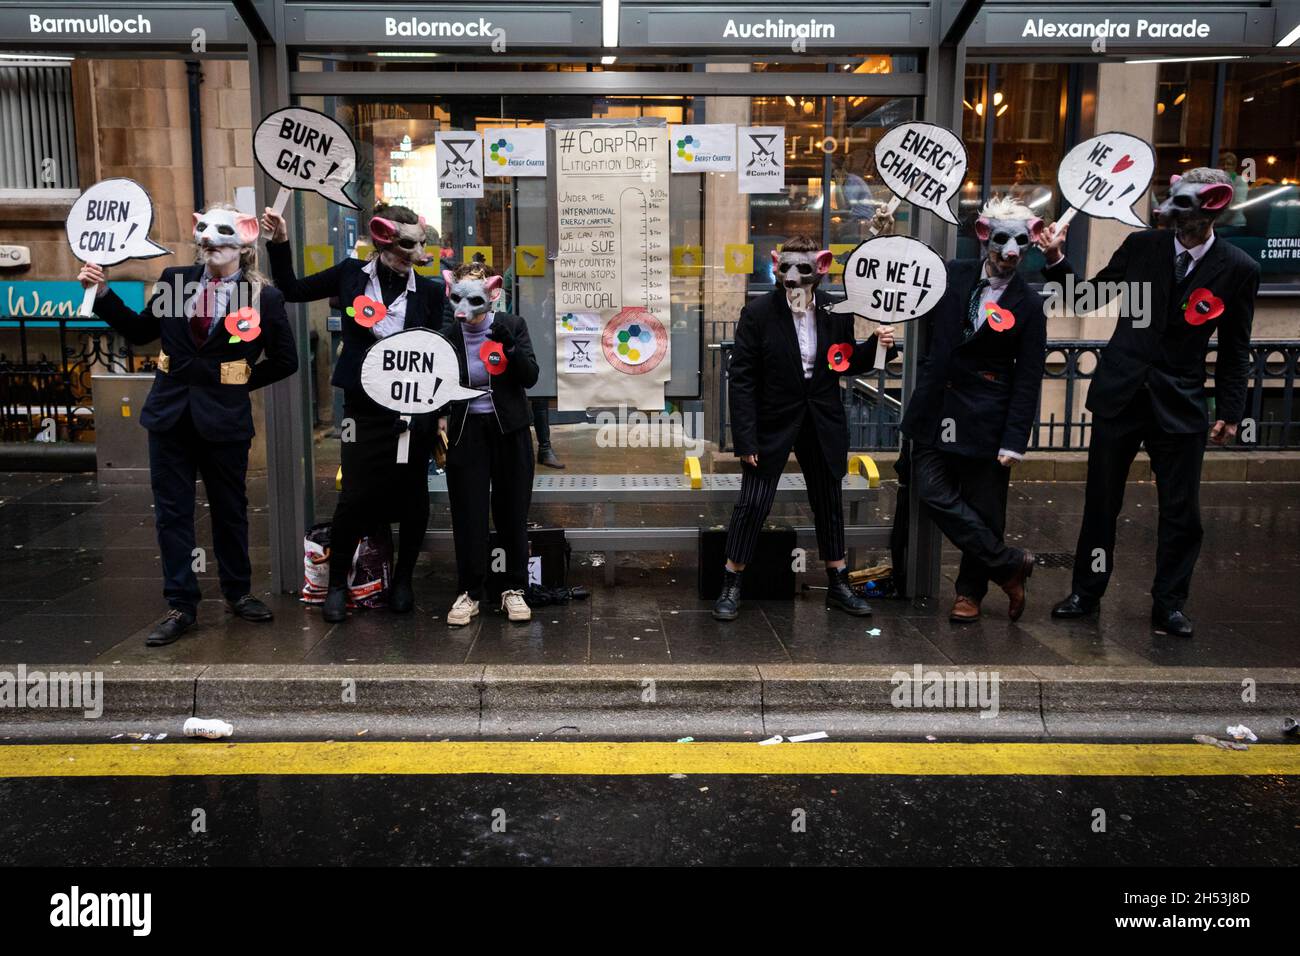 Glasgow, UK. 06th Nov, 2021. Protesters dressed up as rats in suits stand with a placards during the Global Day of Action.ÊThe protest sees movements mobilising against the world leaders attending the COP26 Climate summit. Credit: Andy Barton/Alamy Live News Stock Photo